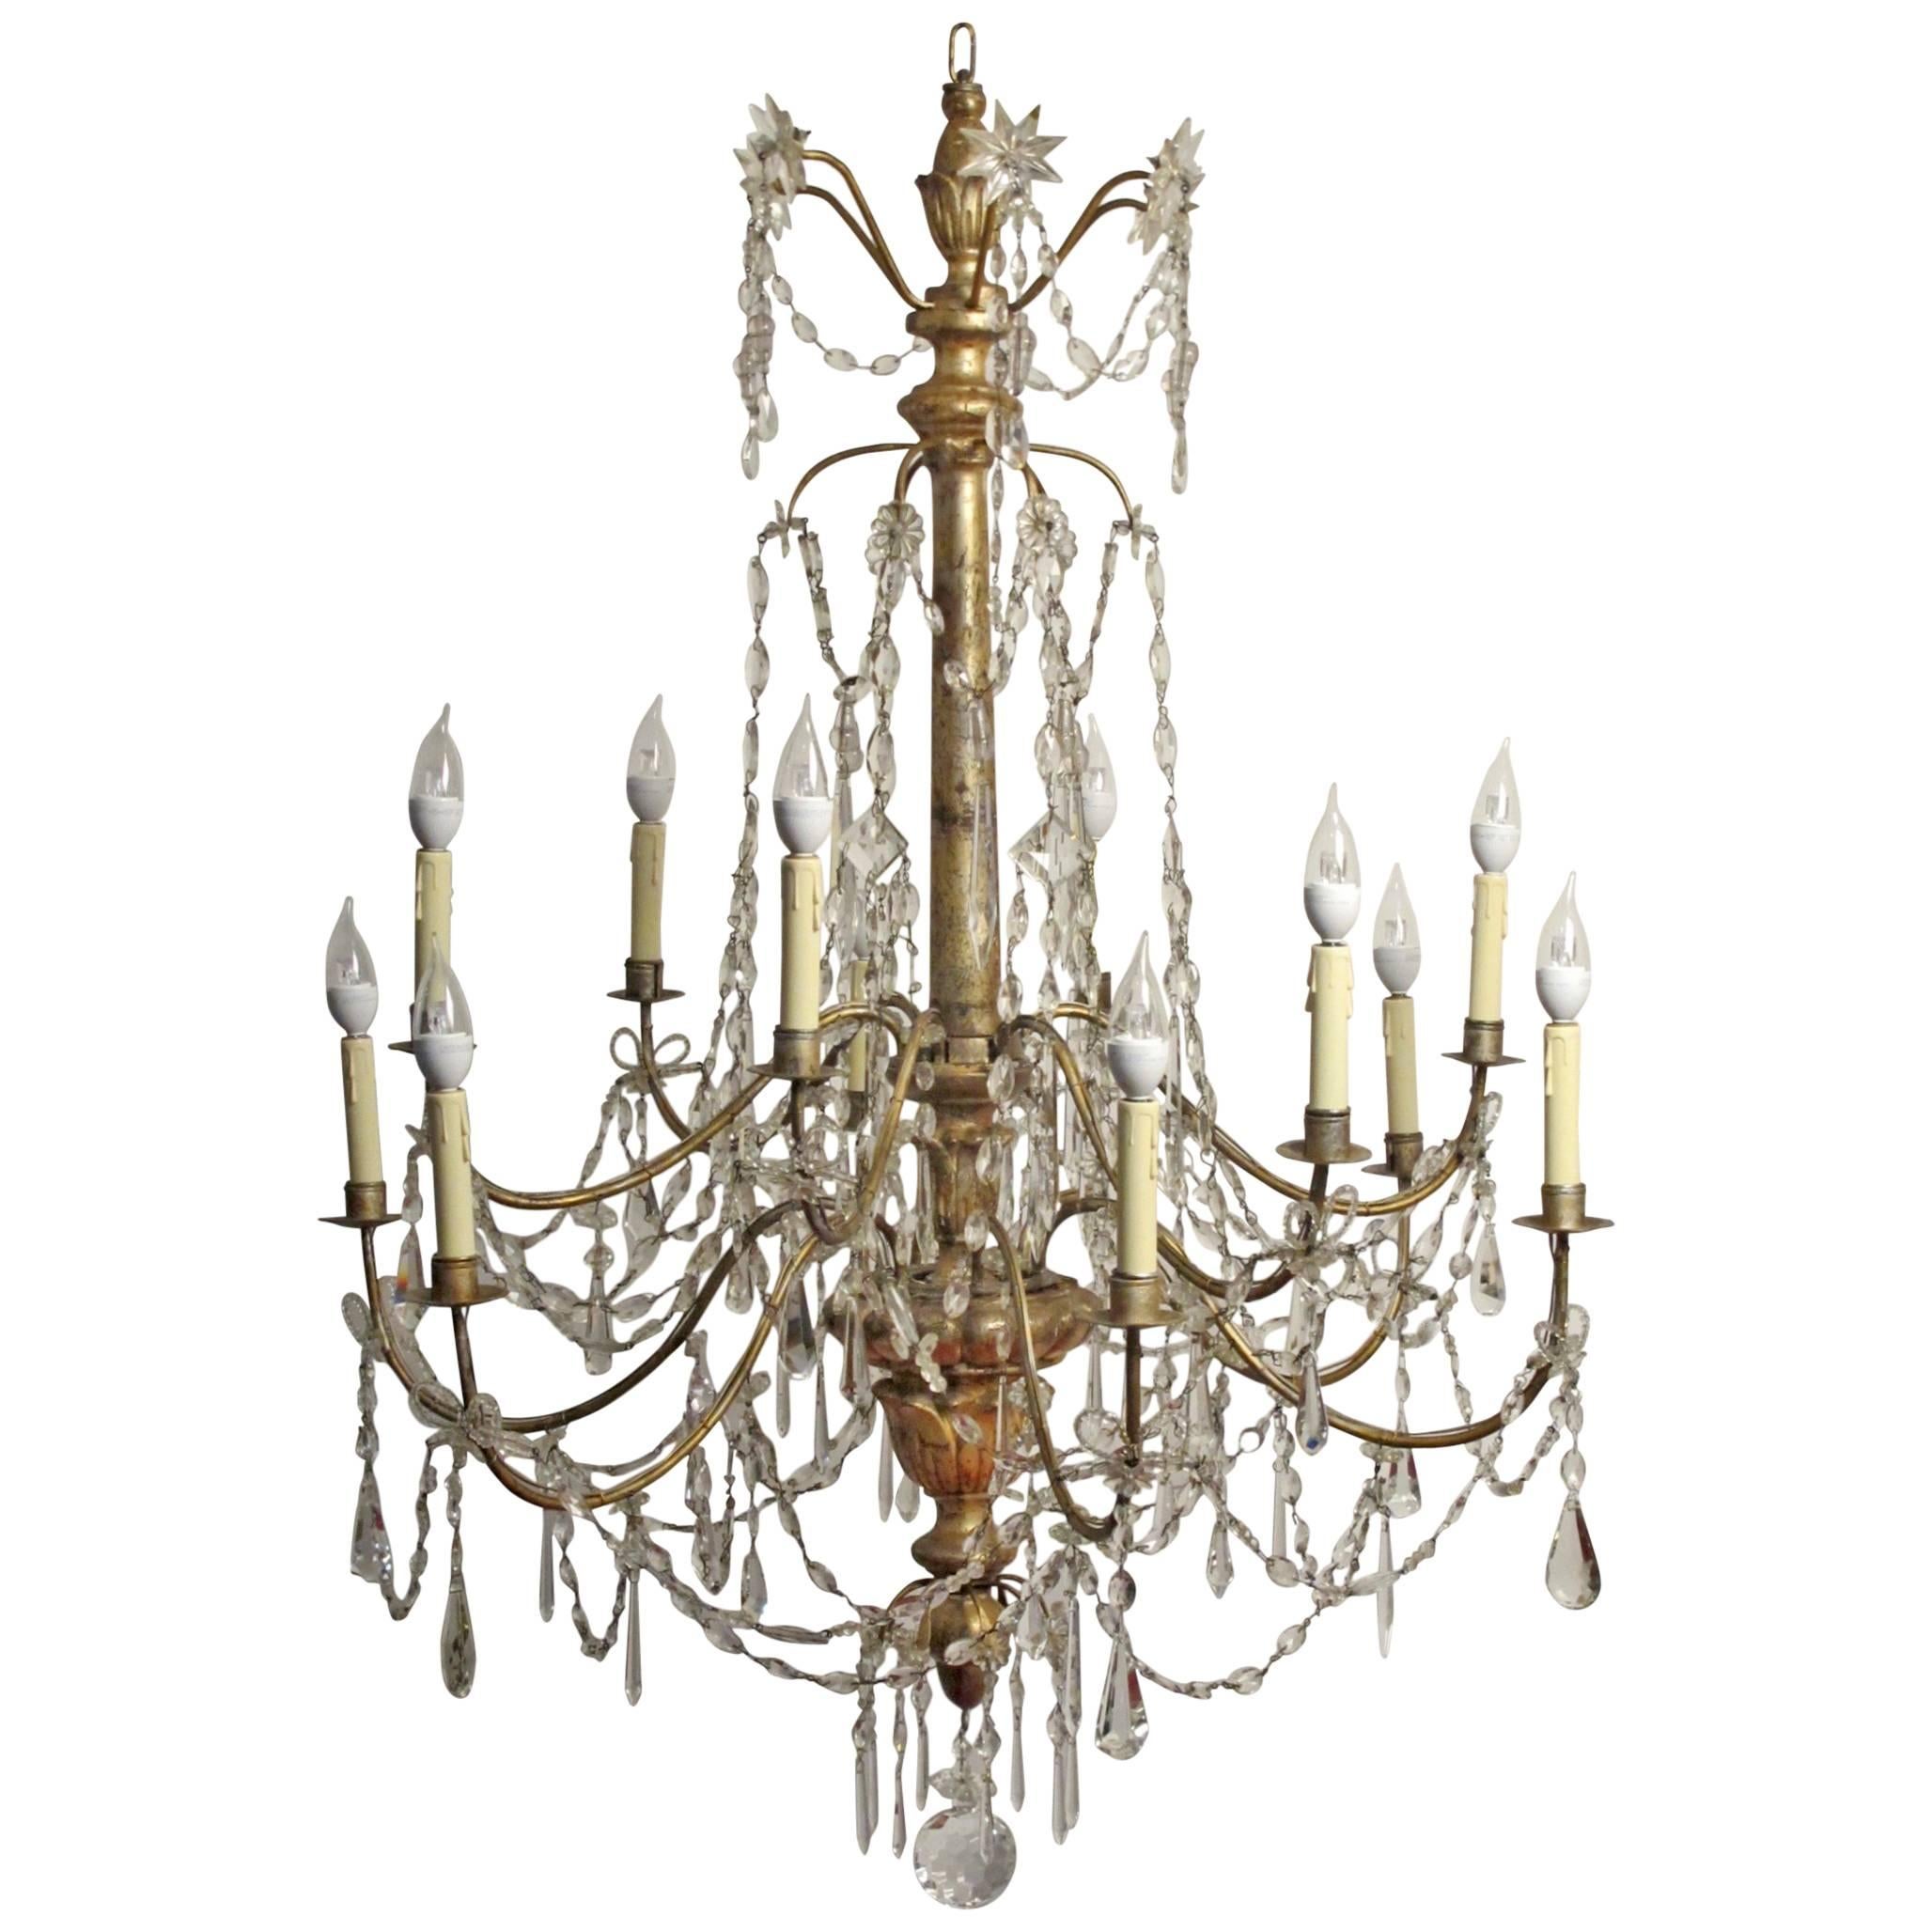 Large Silver Gilt Wood, Iron, and Crystal Chandelier, Italian 18th Century